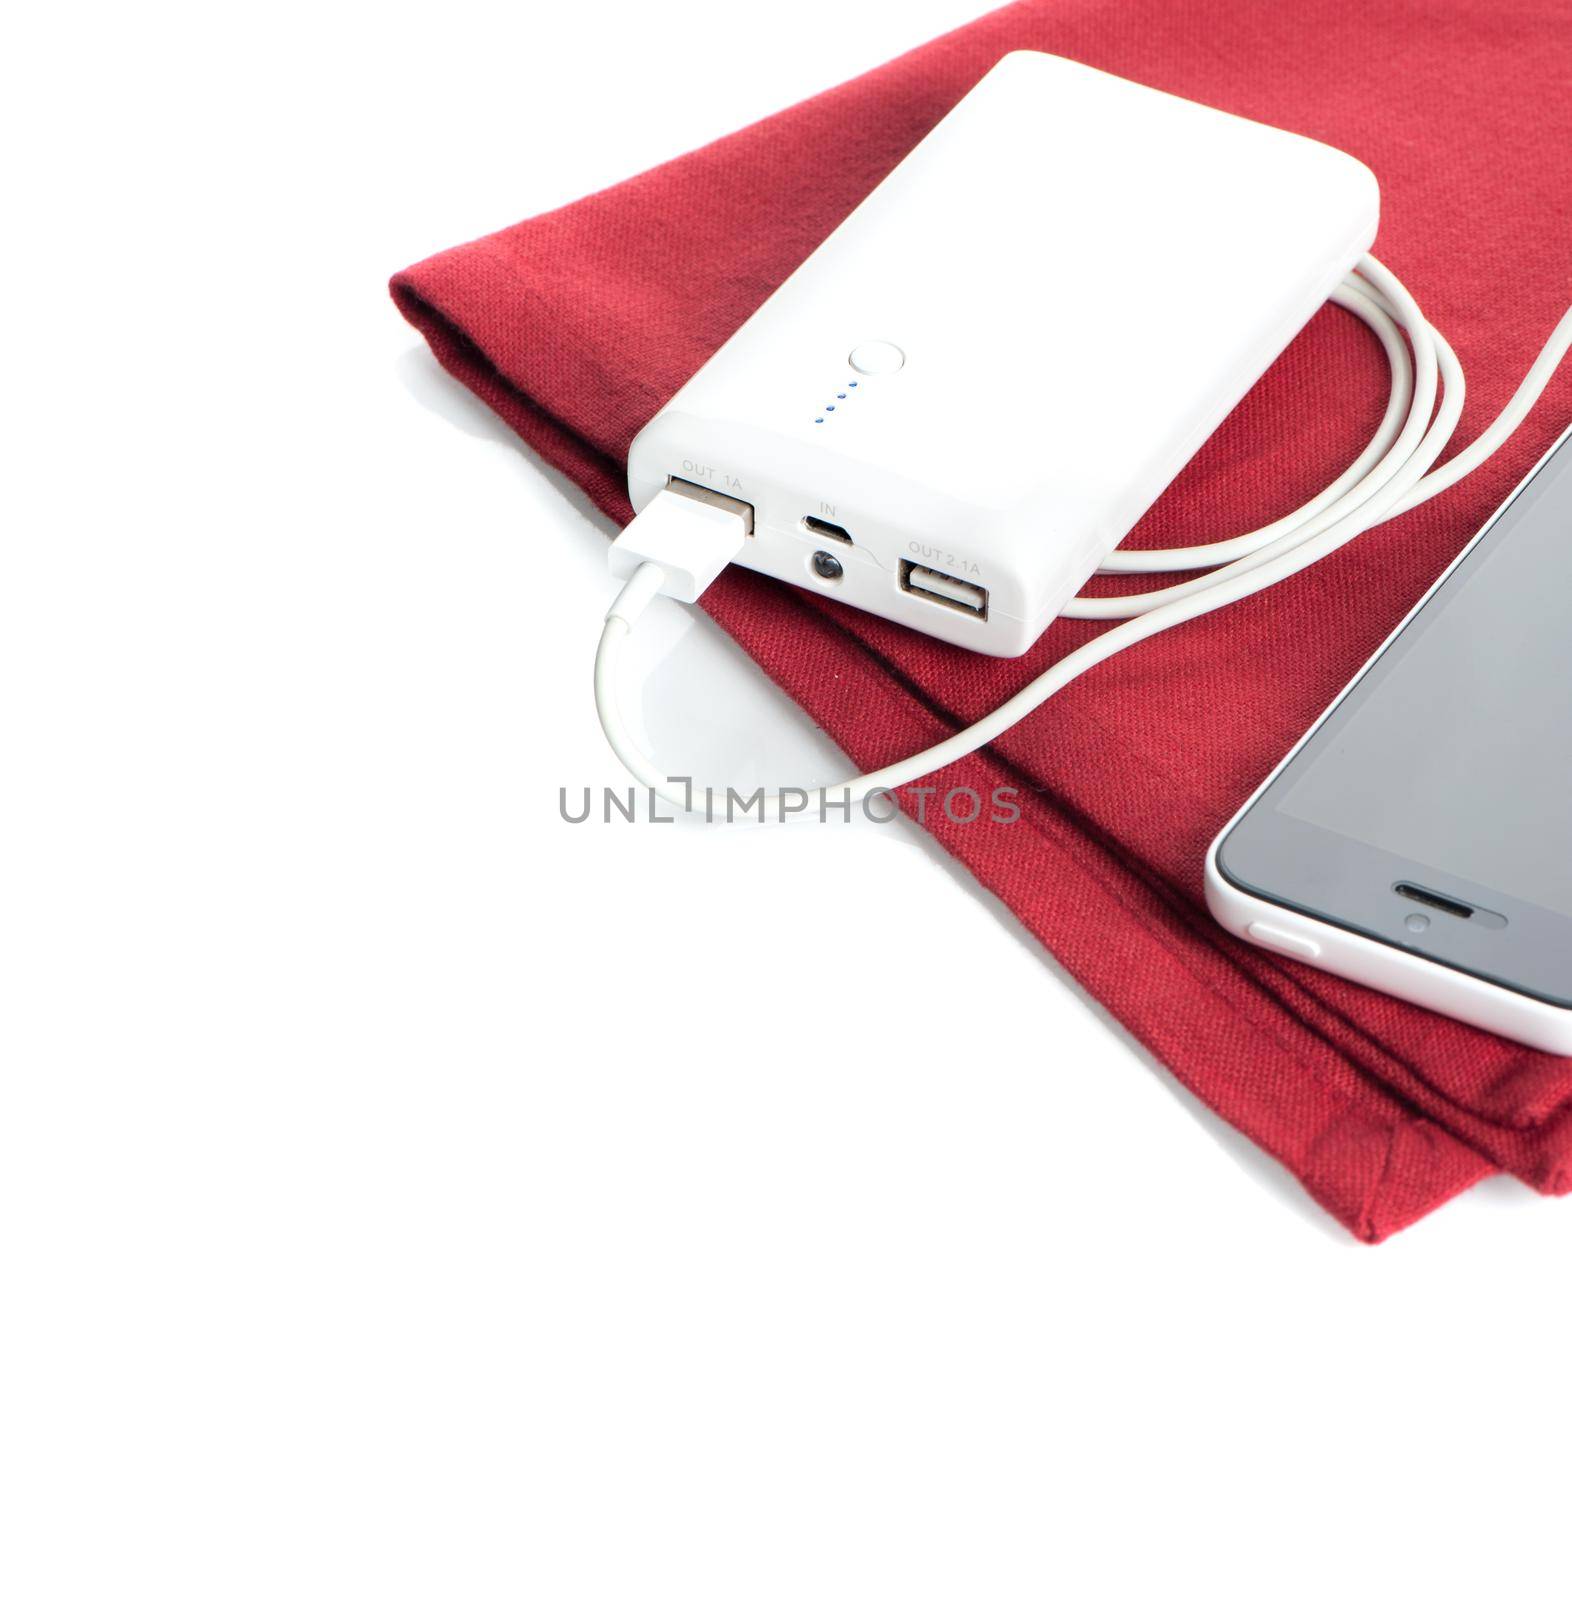 isolate white power bank for charging mobile devices